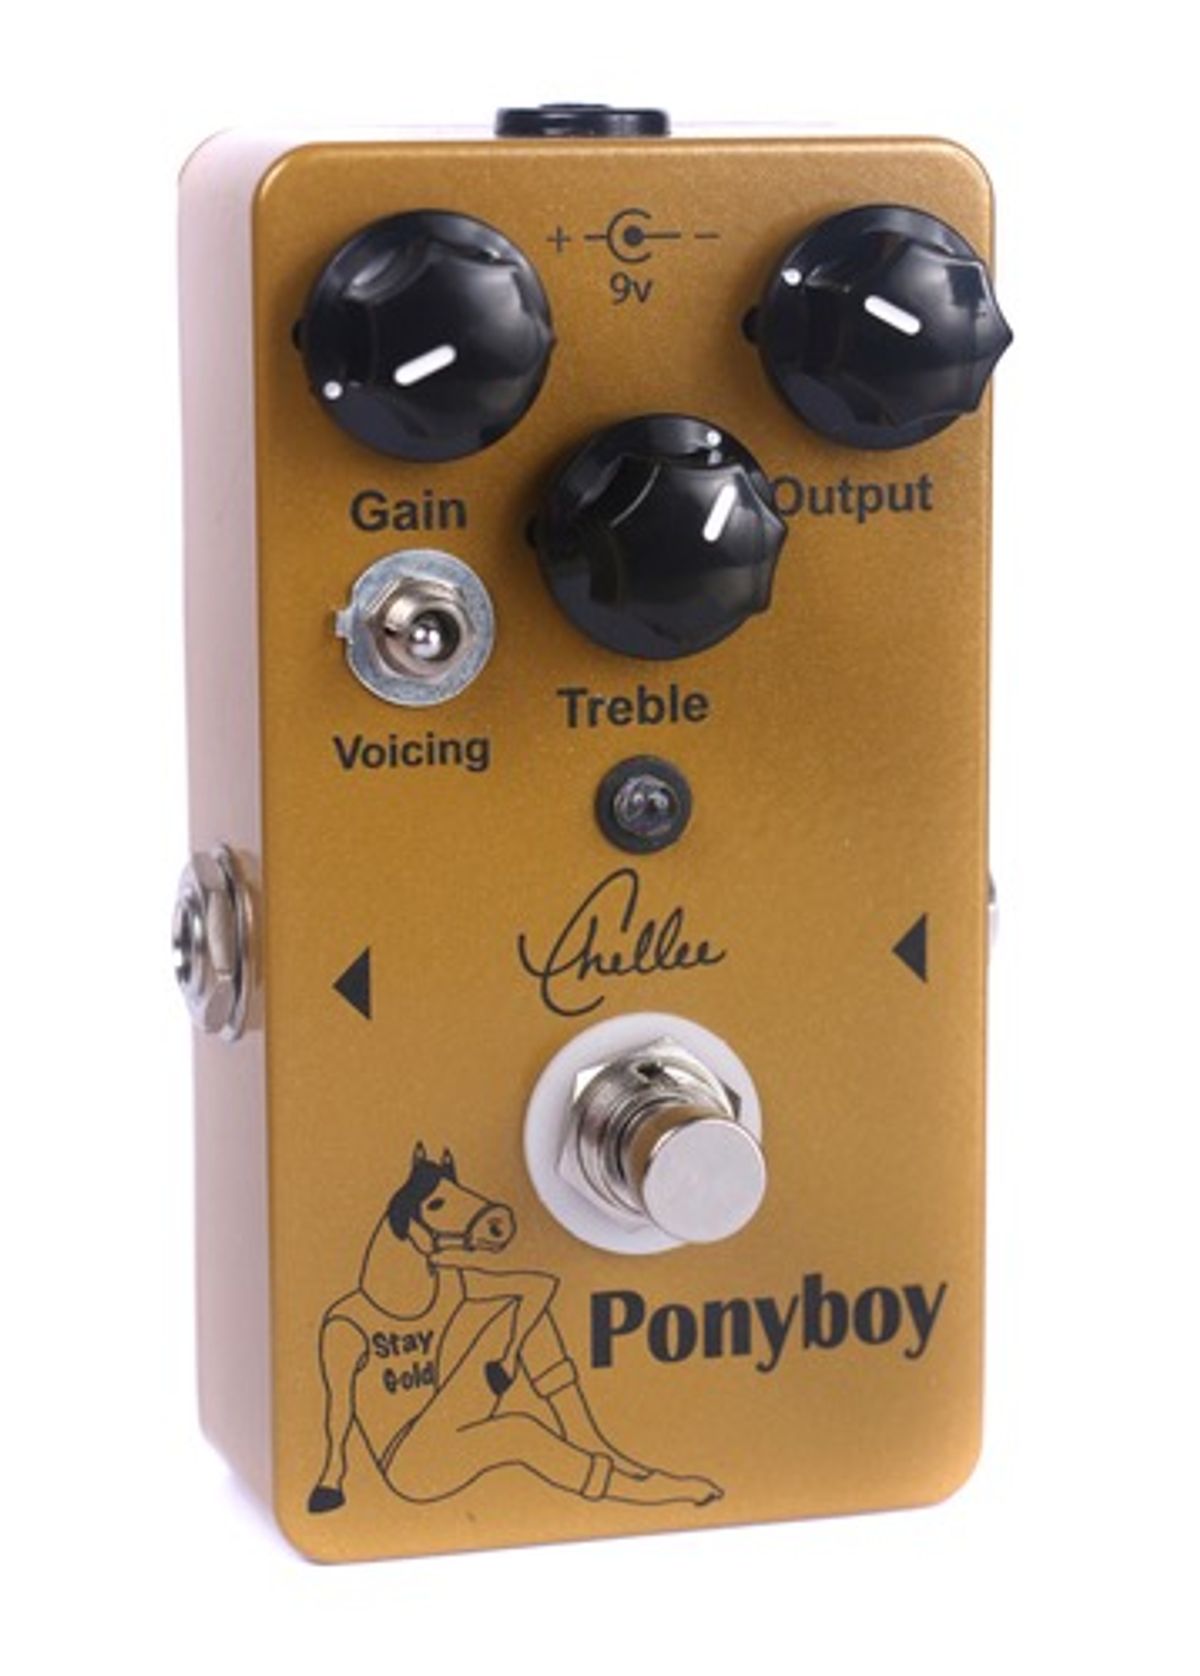 Chellee Guitars Announces the Ponyboy Overdrive